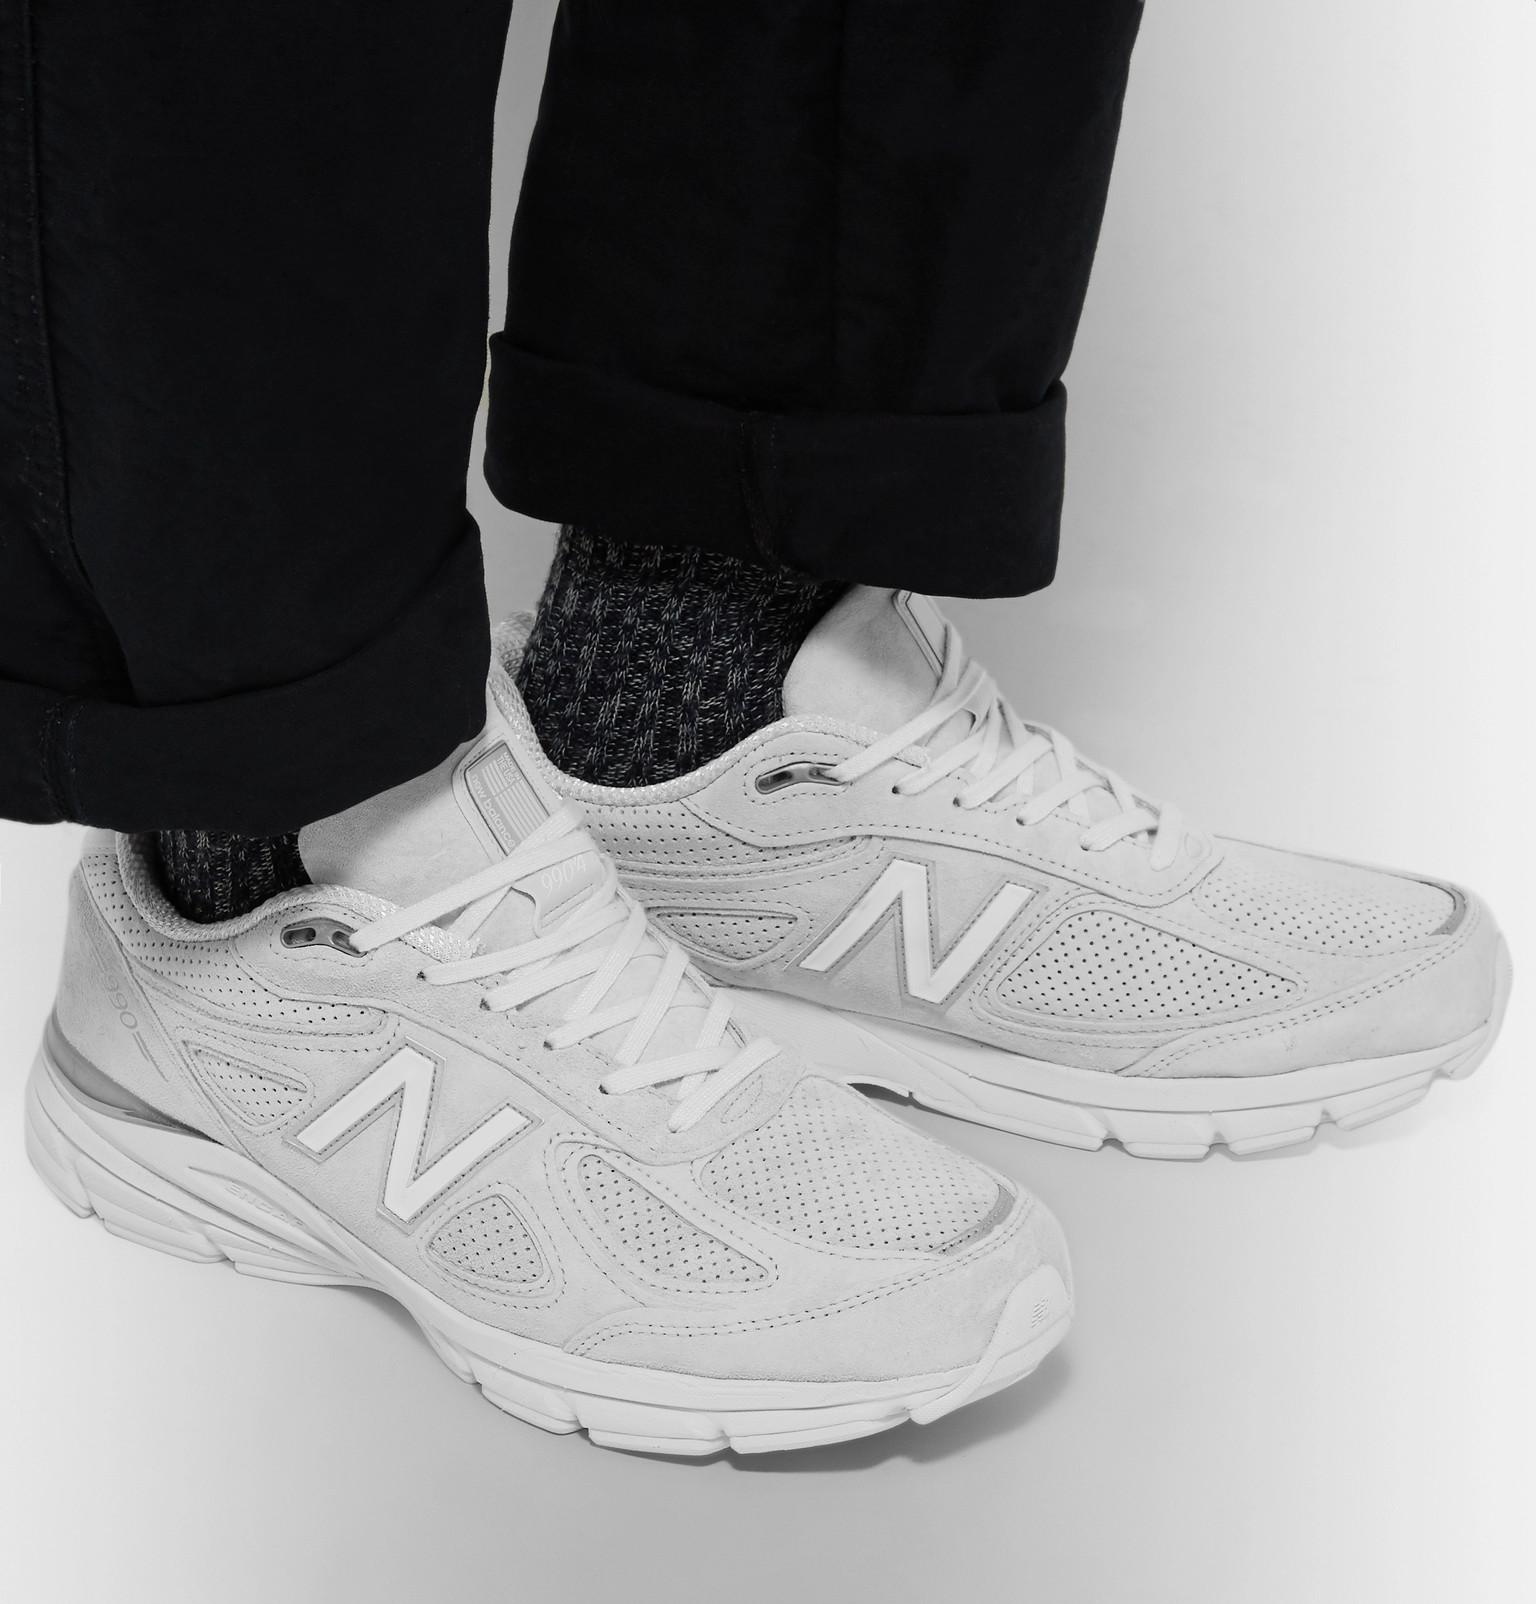 New Balance 990 Suede Sneakers in White for Men - Lyst